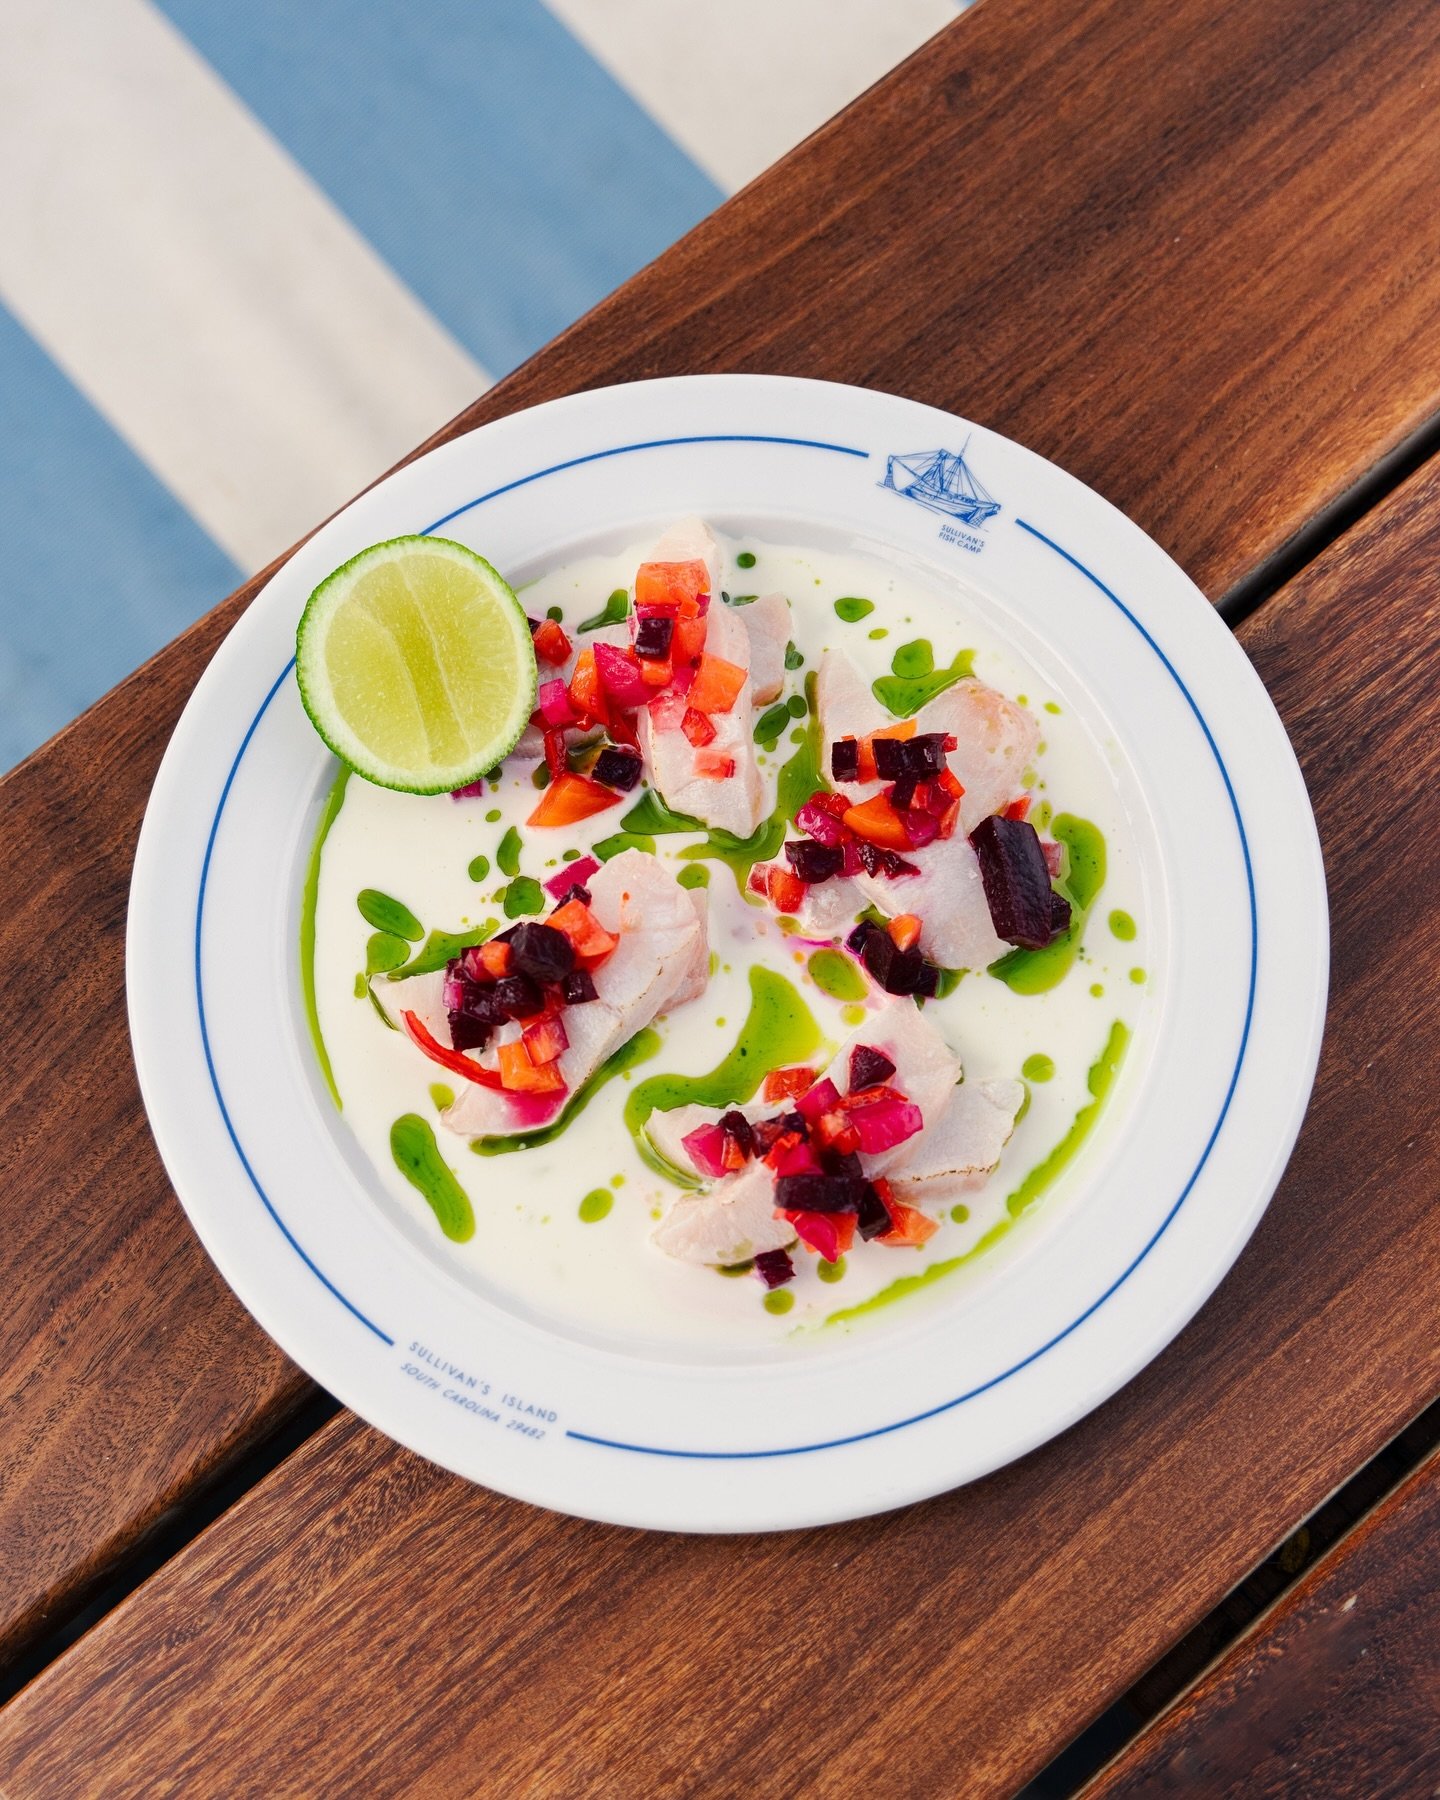 This Cobia Crudo special is crazy good - tonight at @sullivansfishcamp 🐟

Coconut lime leche de tigre, beets, pickled fresno peppers, and dill oil ✨